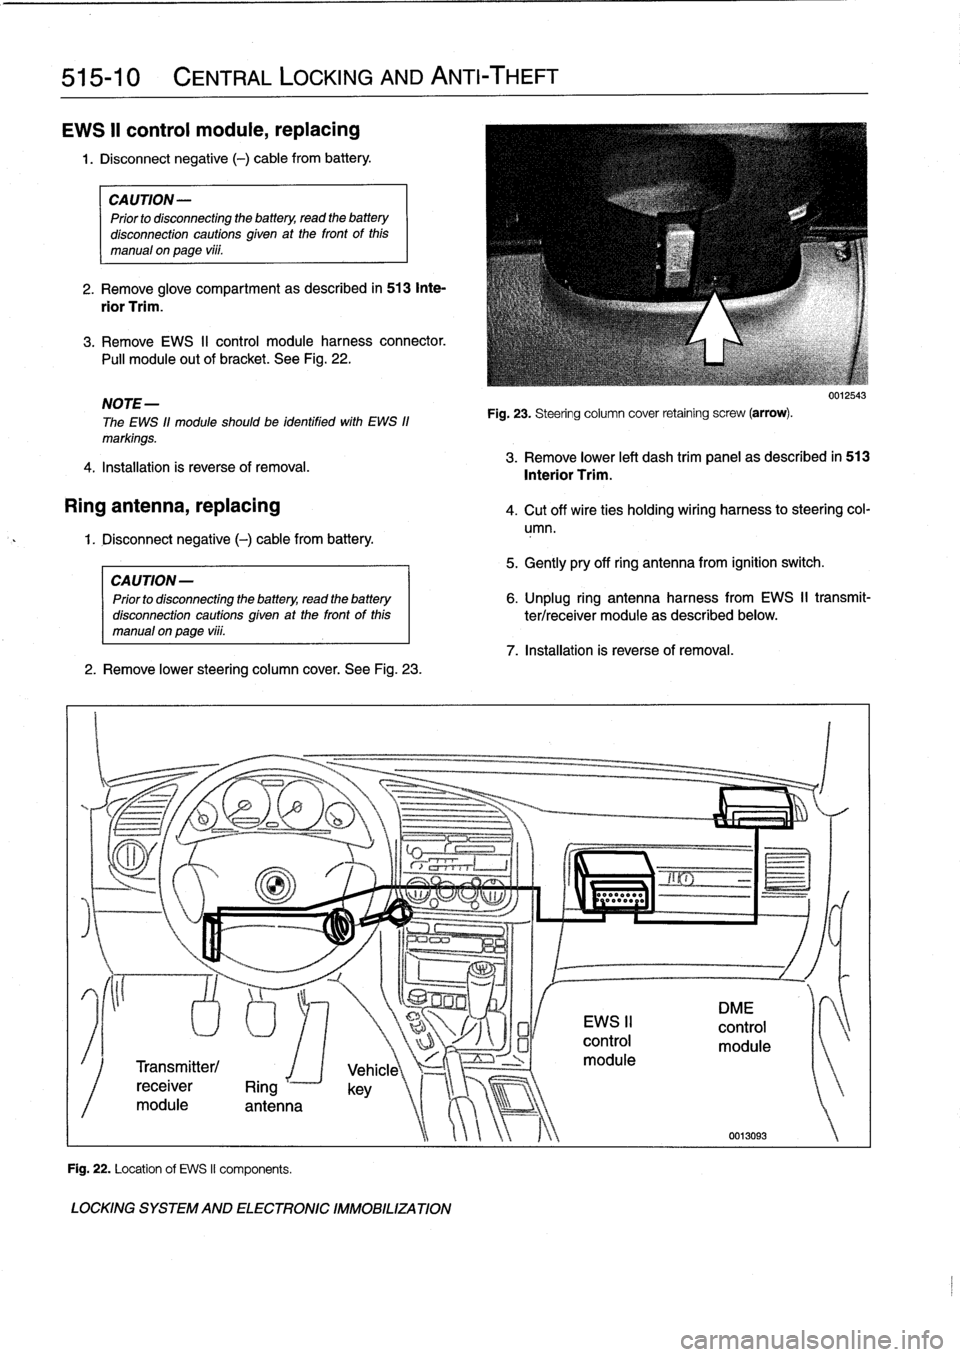 BMW 328i 1992 E36 Workshop Manual 
515-10

	

CENTRAL
LOCKING
AND
ANTI-THEFT

EWS
II
control
module,
replacing

1
.
Disconnect
negative
(-)
cable
from
battery
.

CAUTION-

Prior
to
disconnecting
the
battery,
read
the
battery

disconne